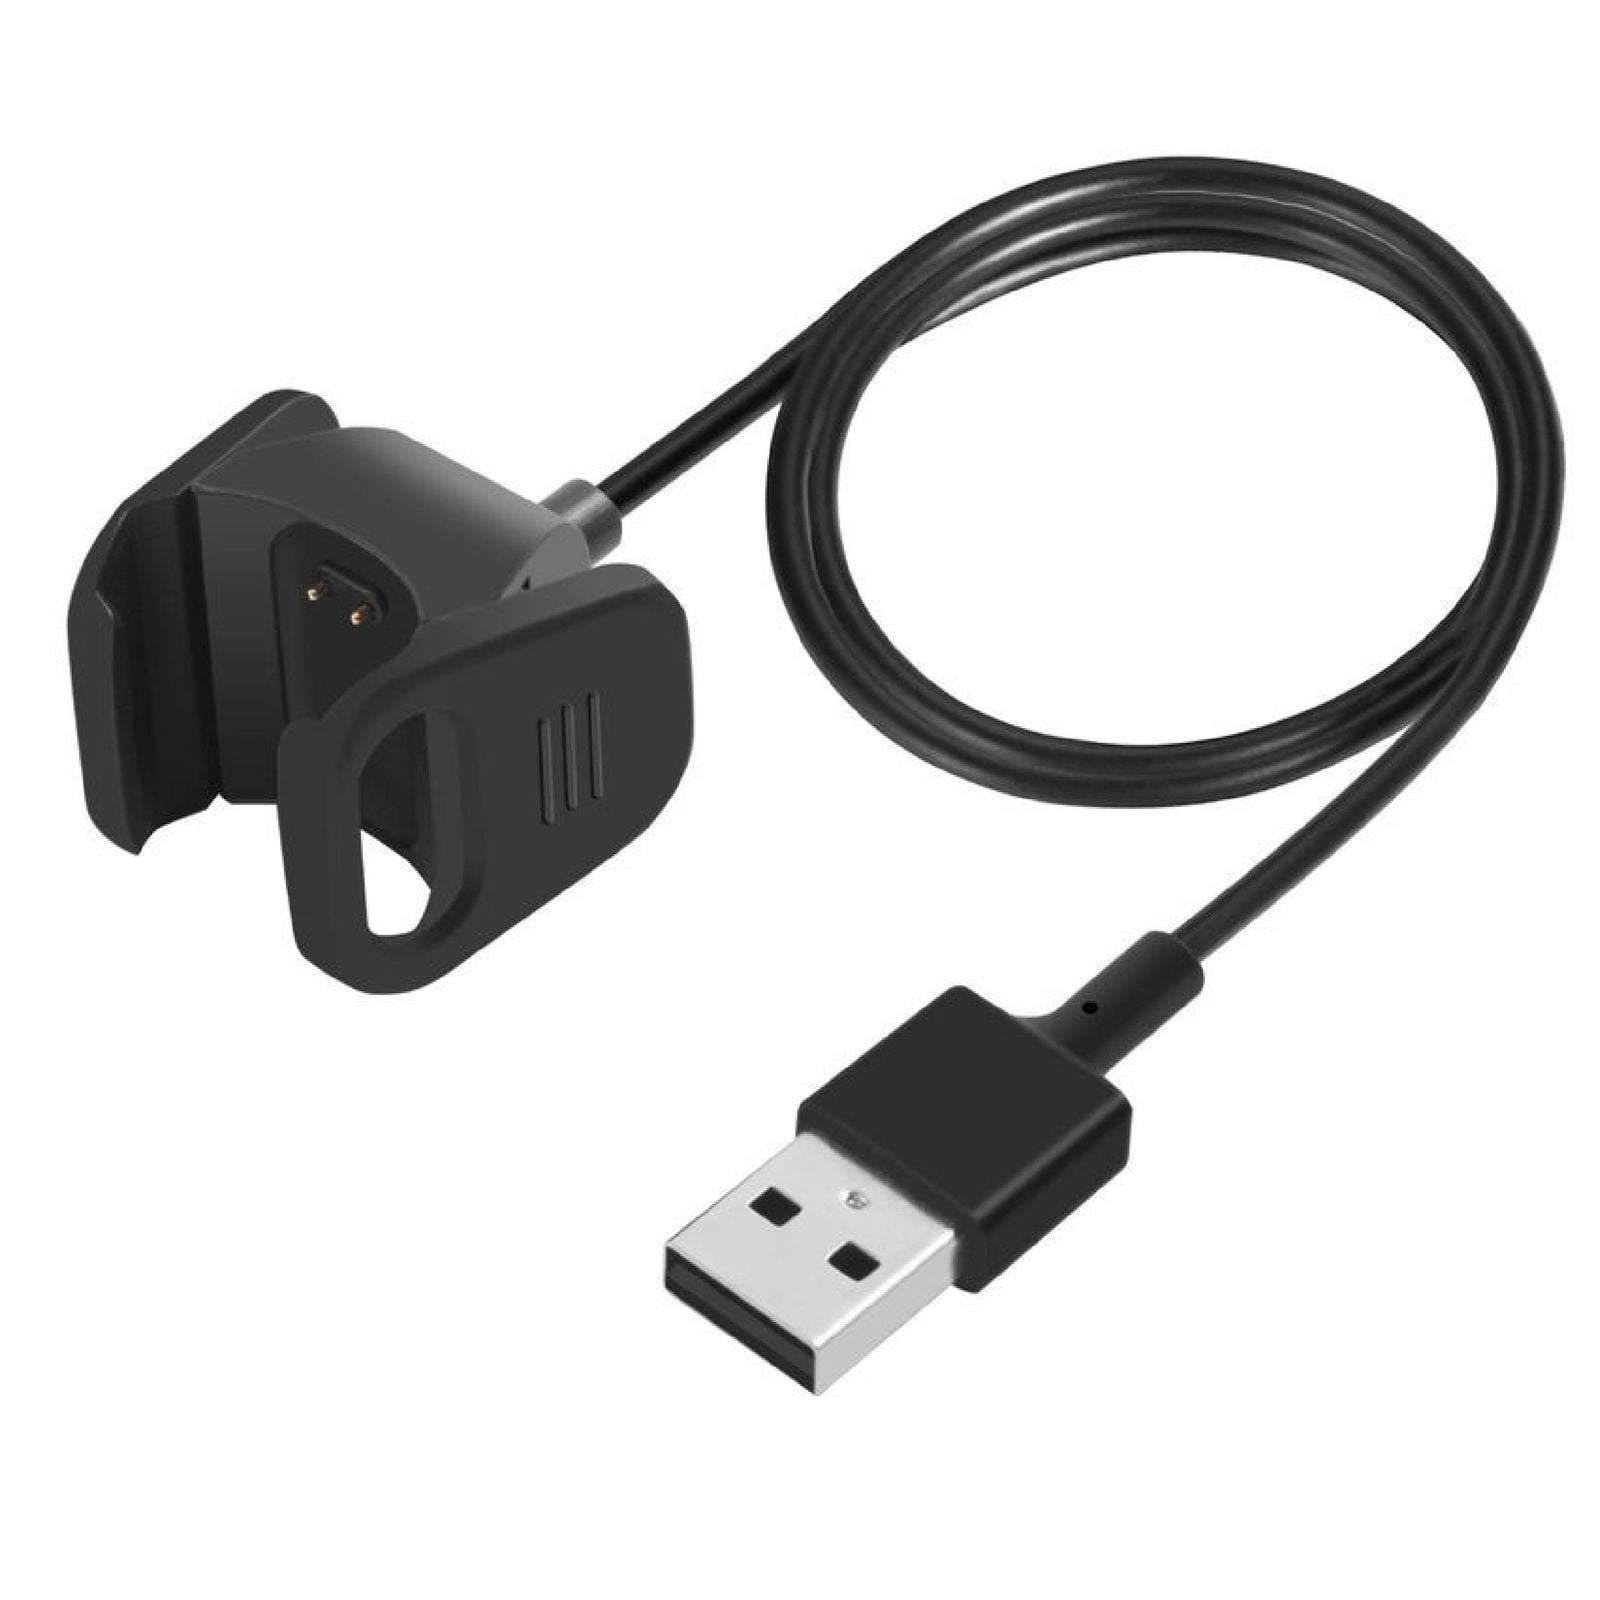 Details about   FITBIT Charging Cable for Charge 3 Activity Tracker NEW 